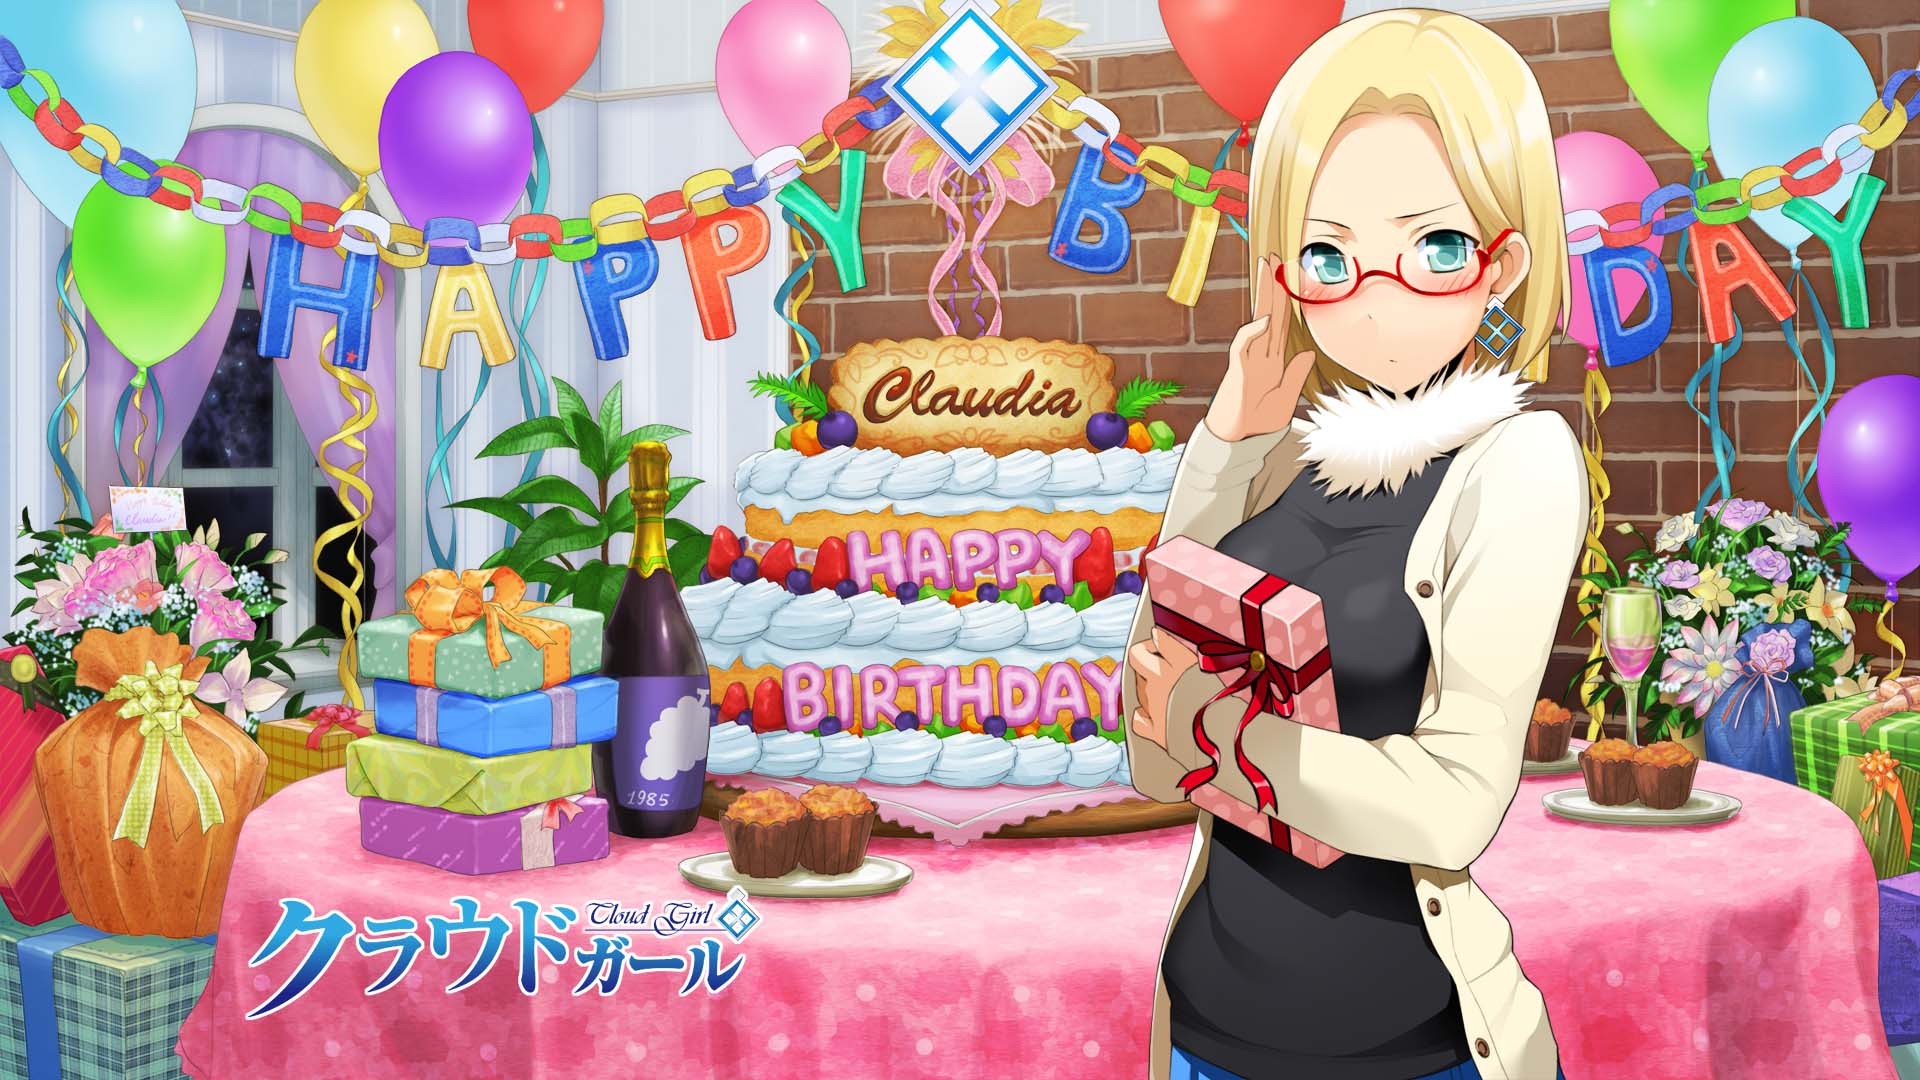 birthday celebration party wallpapers